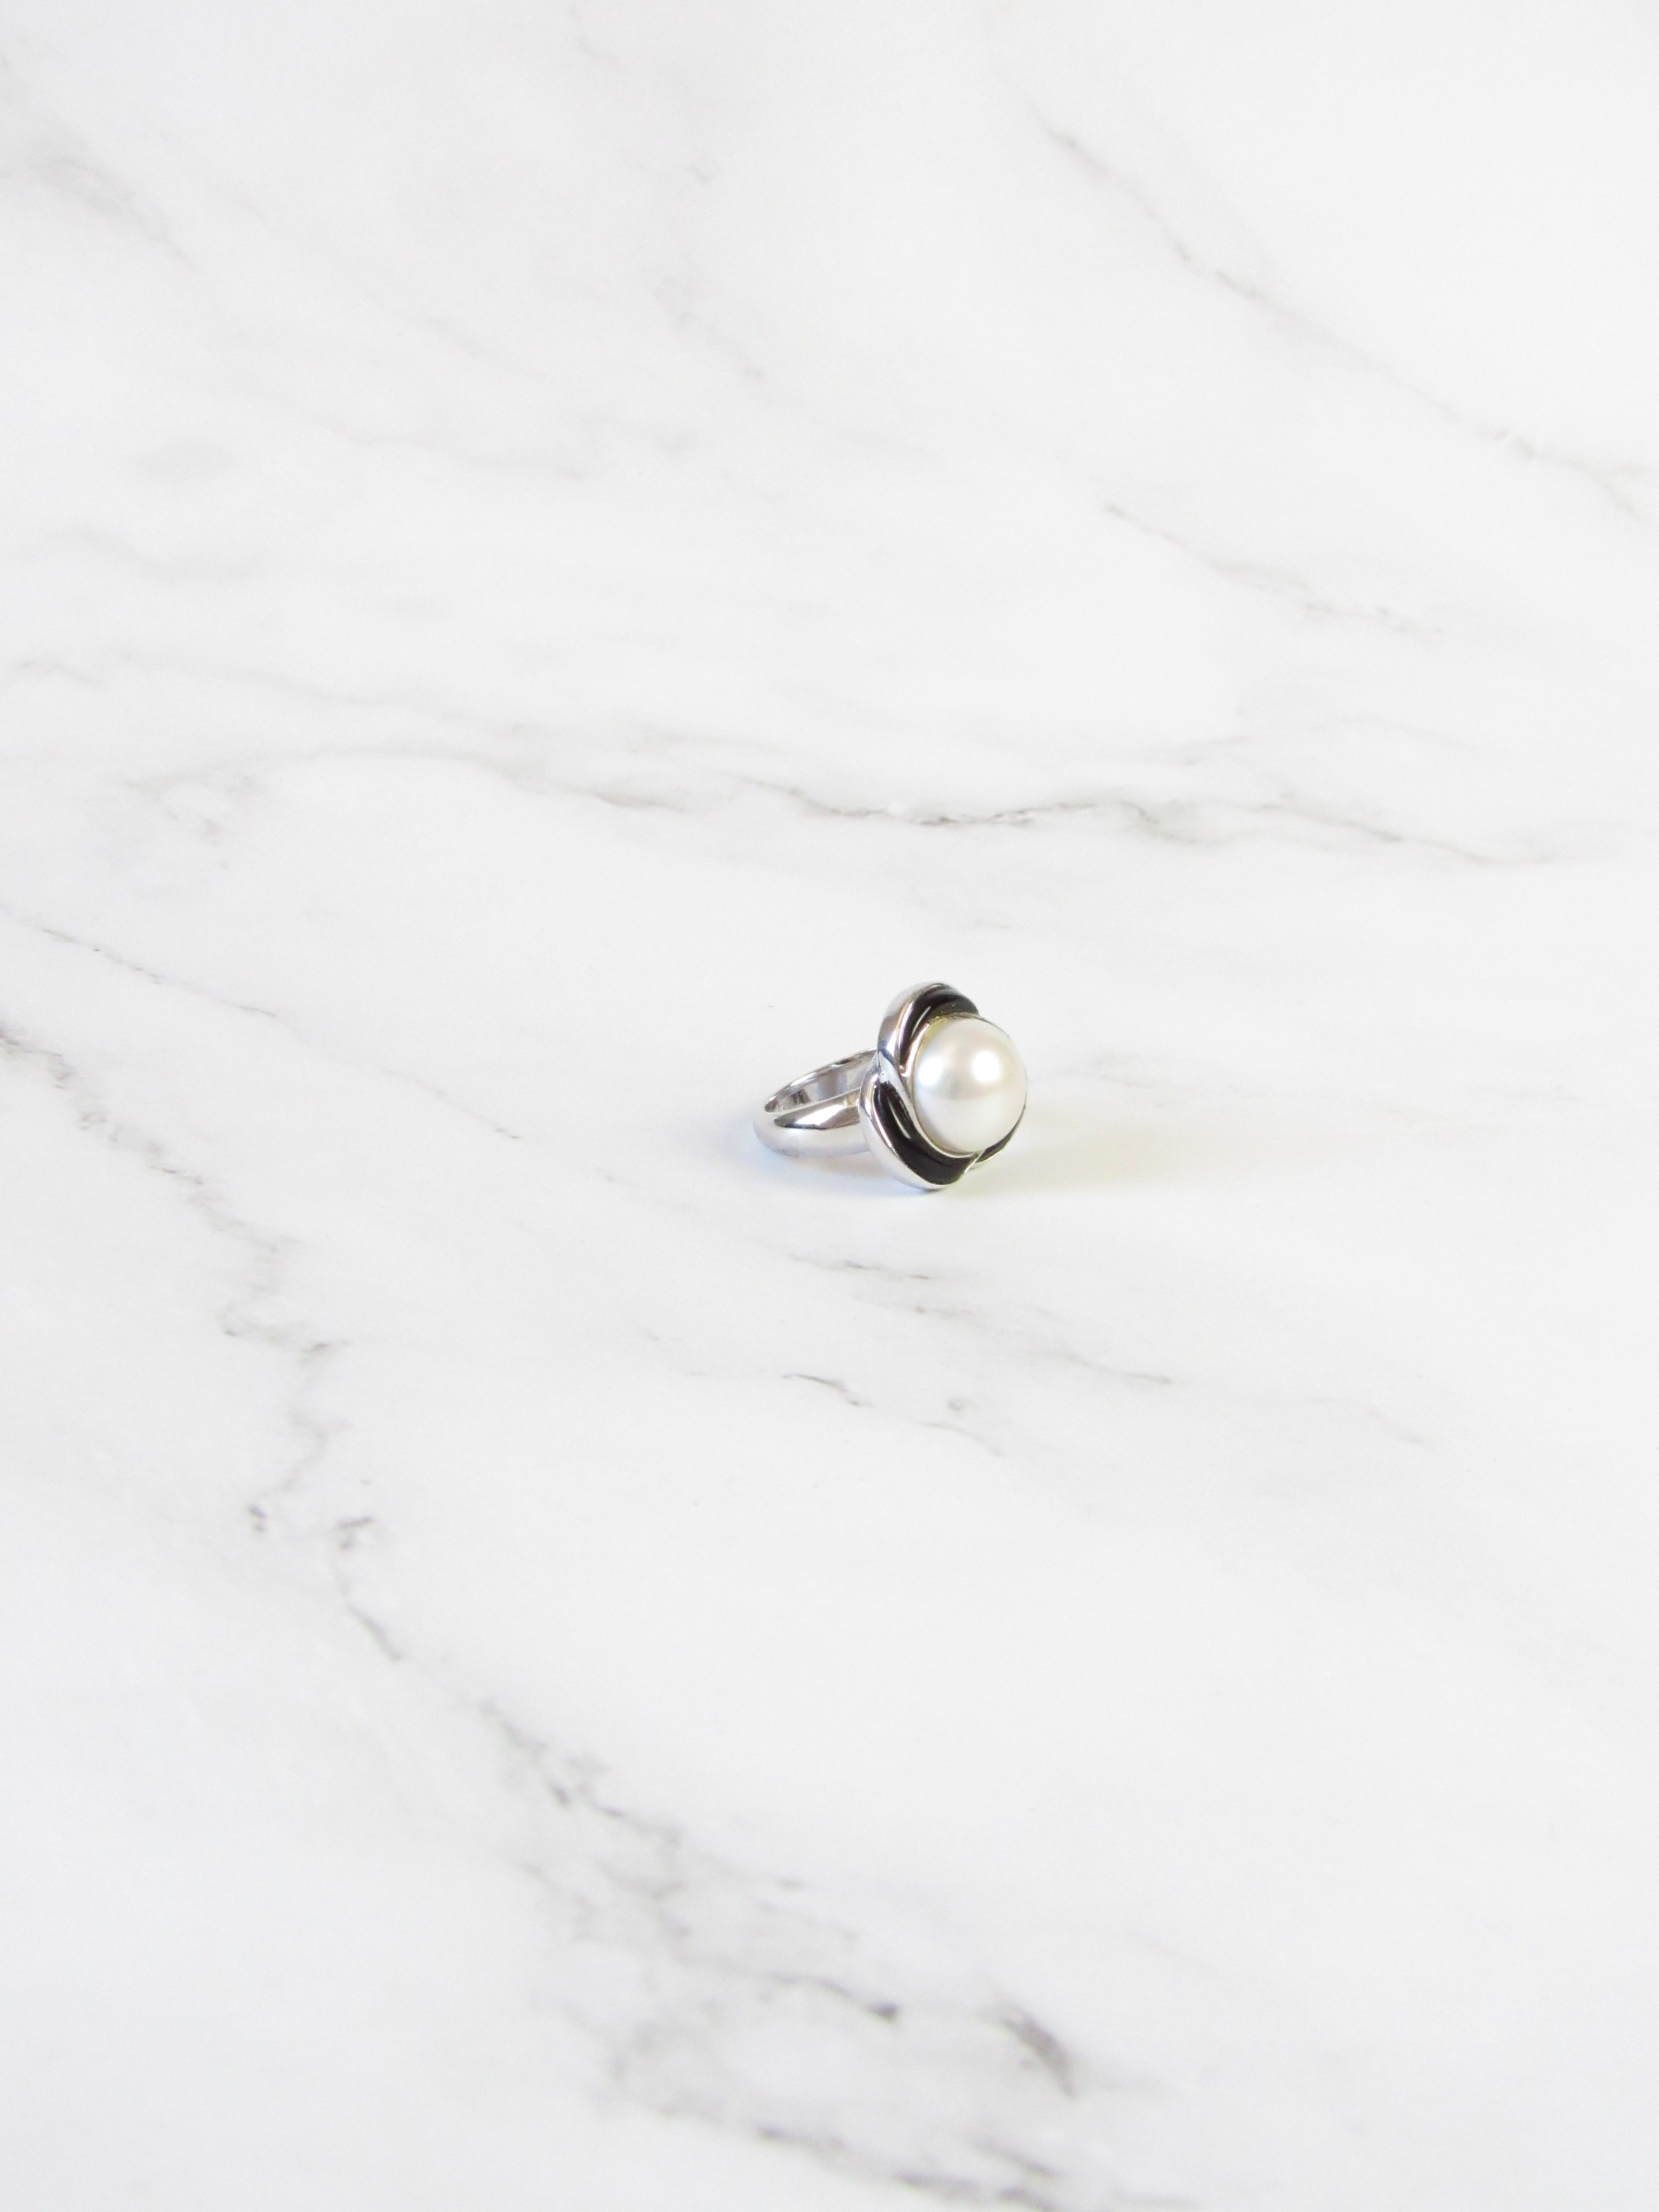 Mabe Pearl Statement Ring